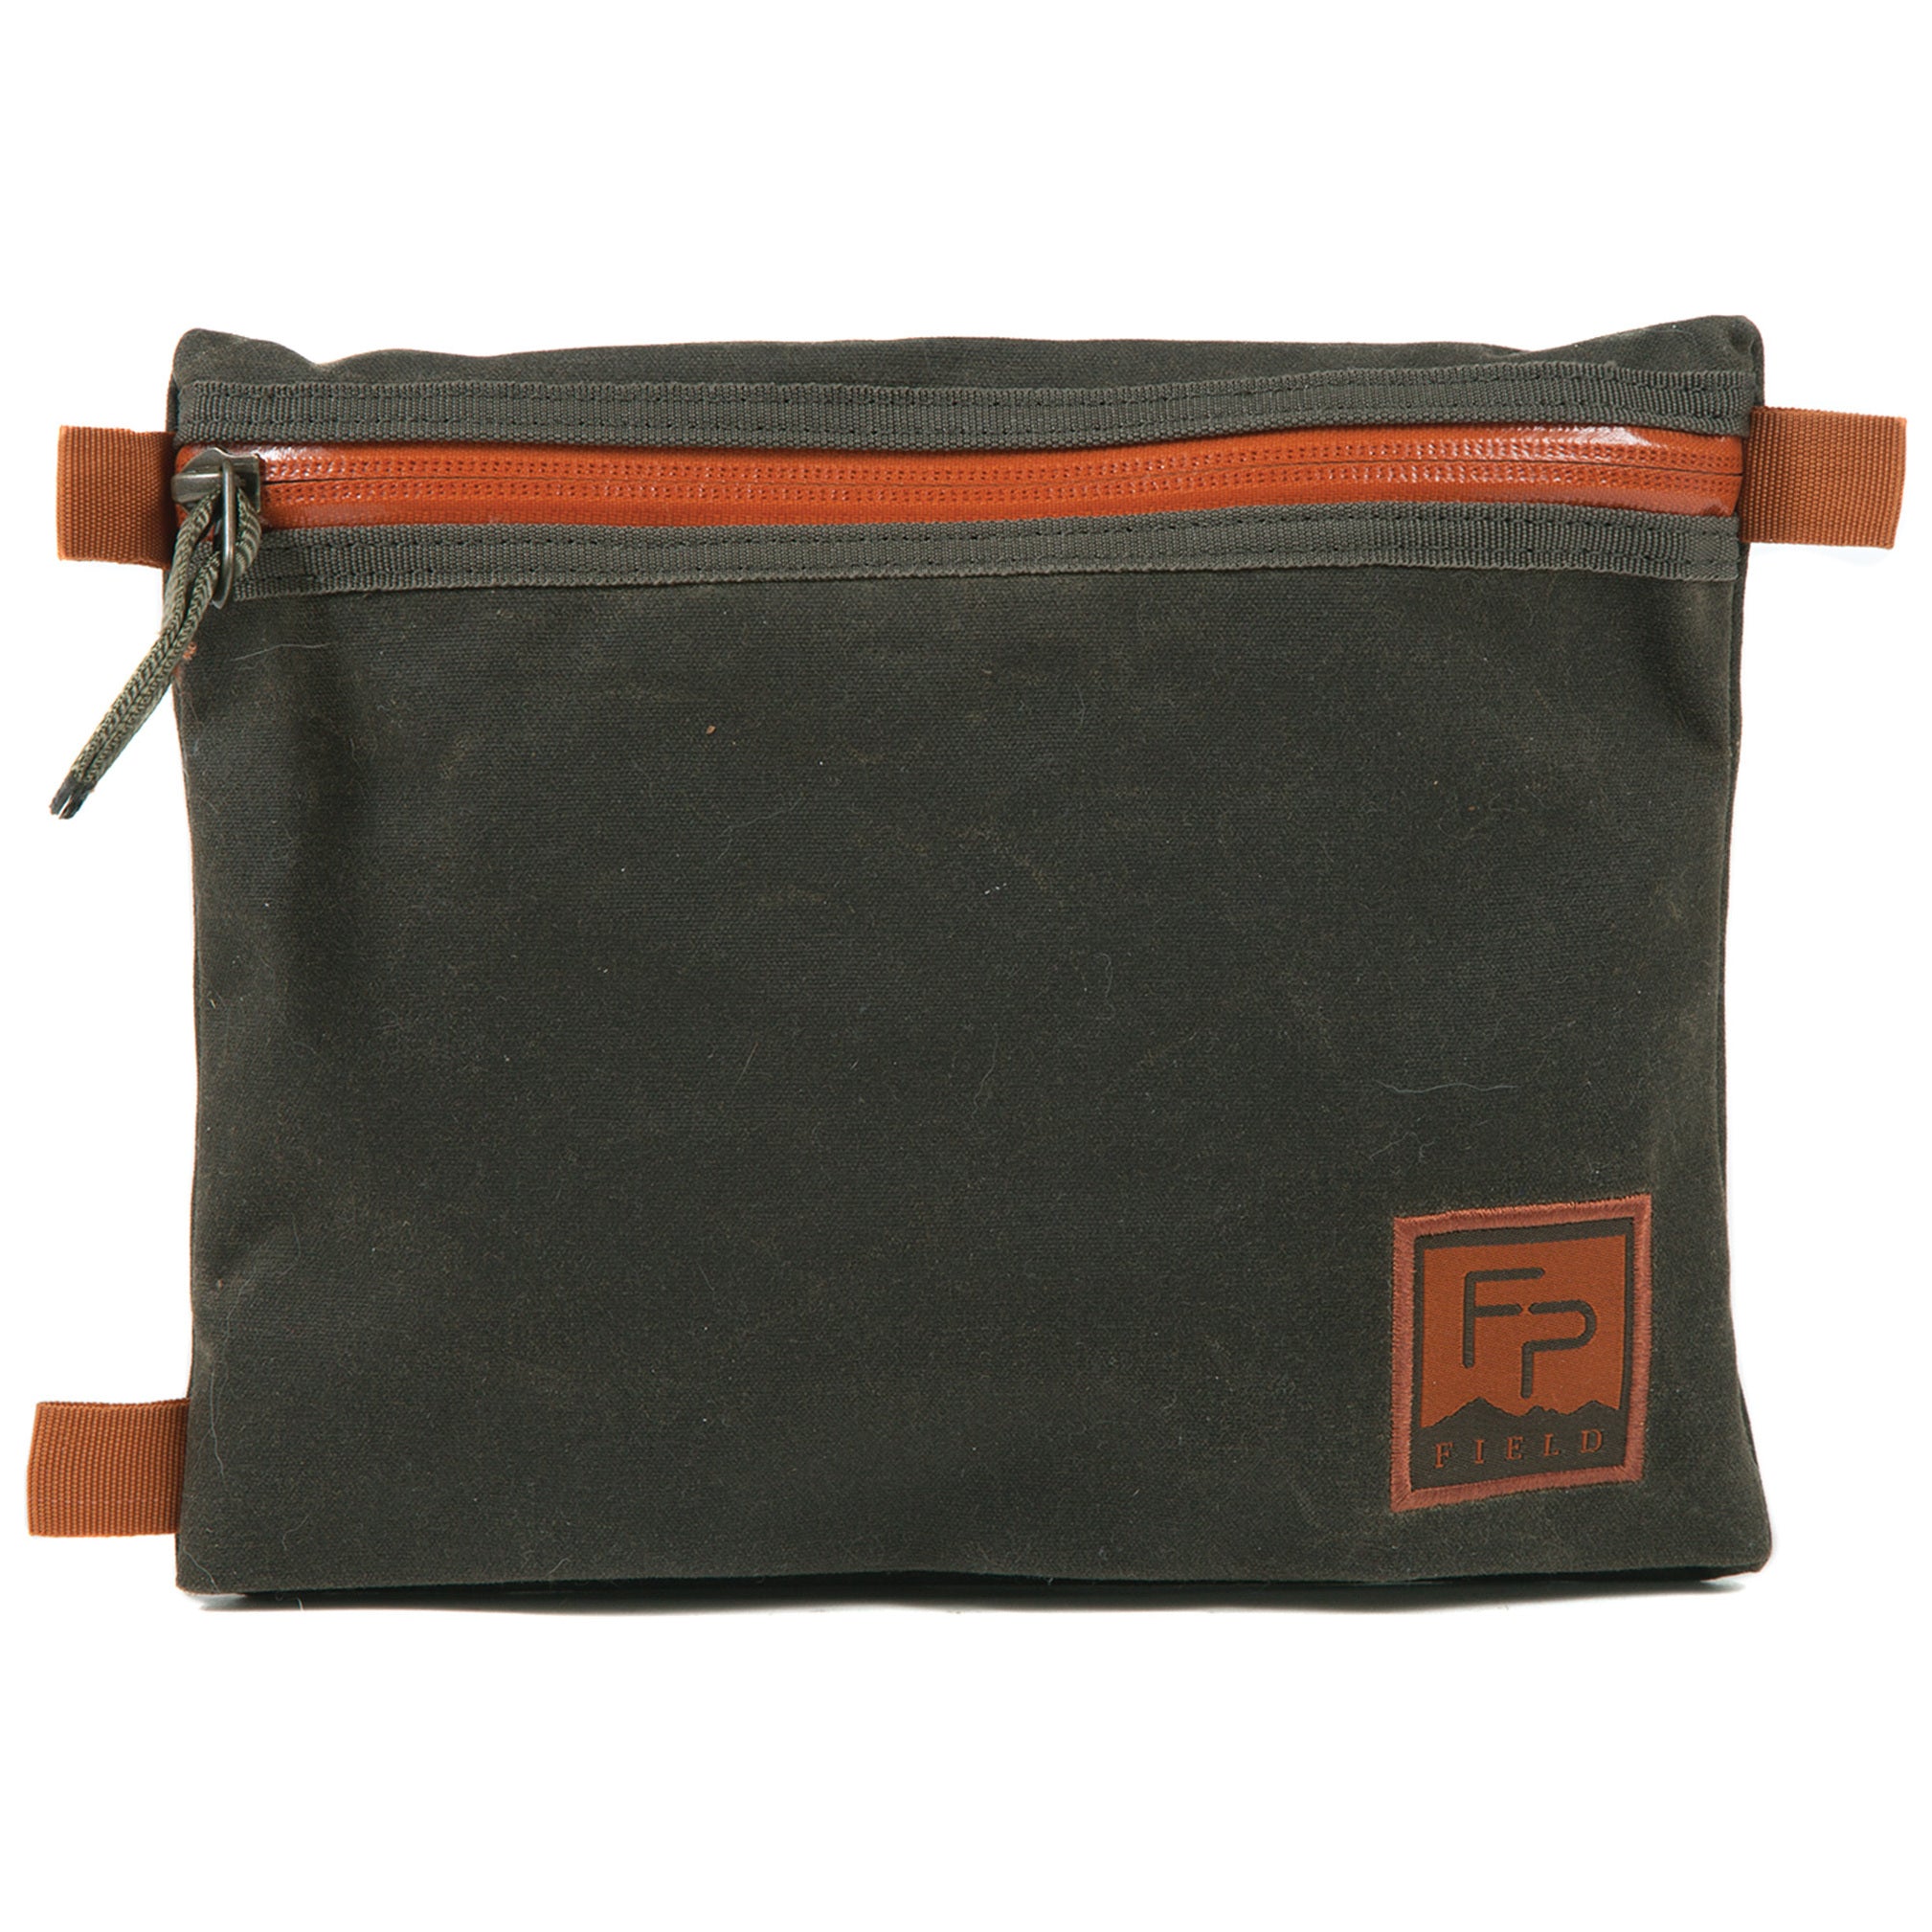 Fishpond Eagle's Nest Travel Pouch Peat Moss Image 01